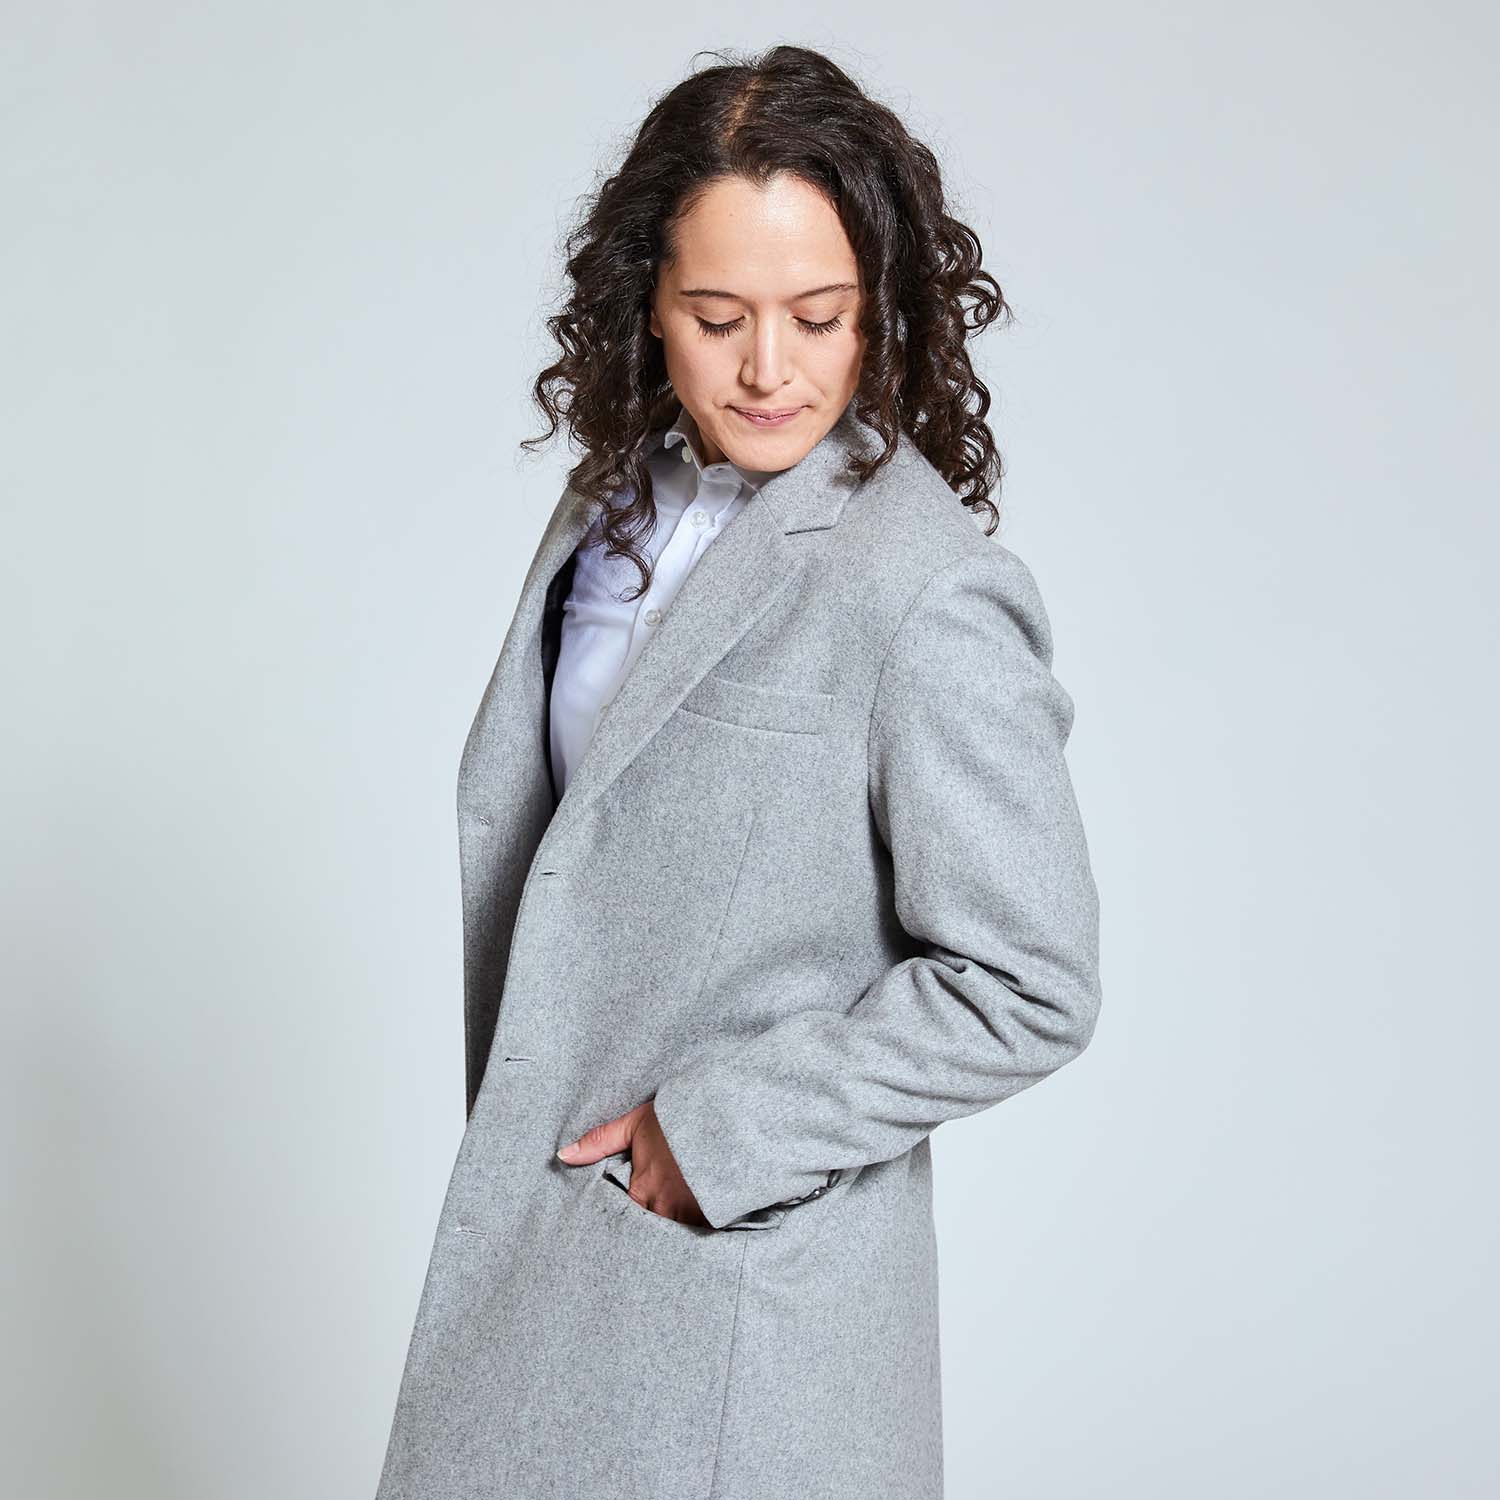 Model with their hand inside gray overcoat pocket while looking down.